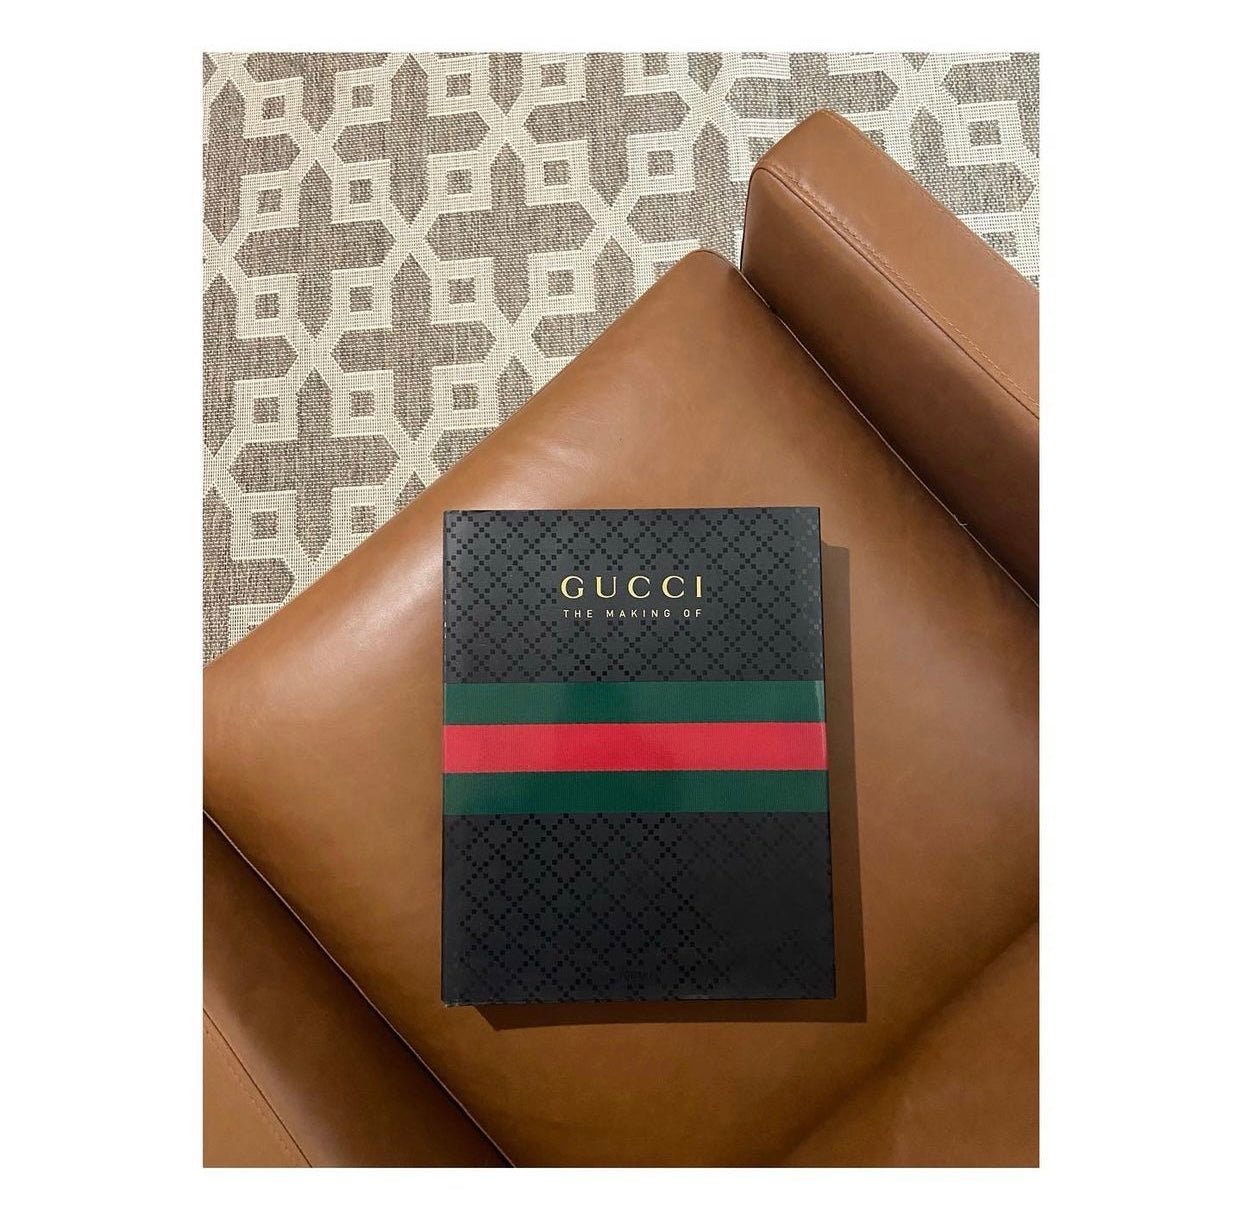 Gucci - The Making of – Visually Rich